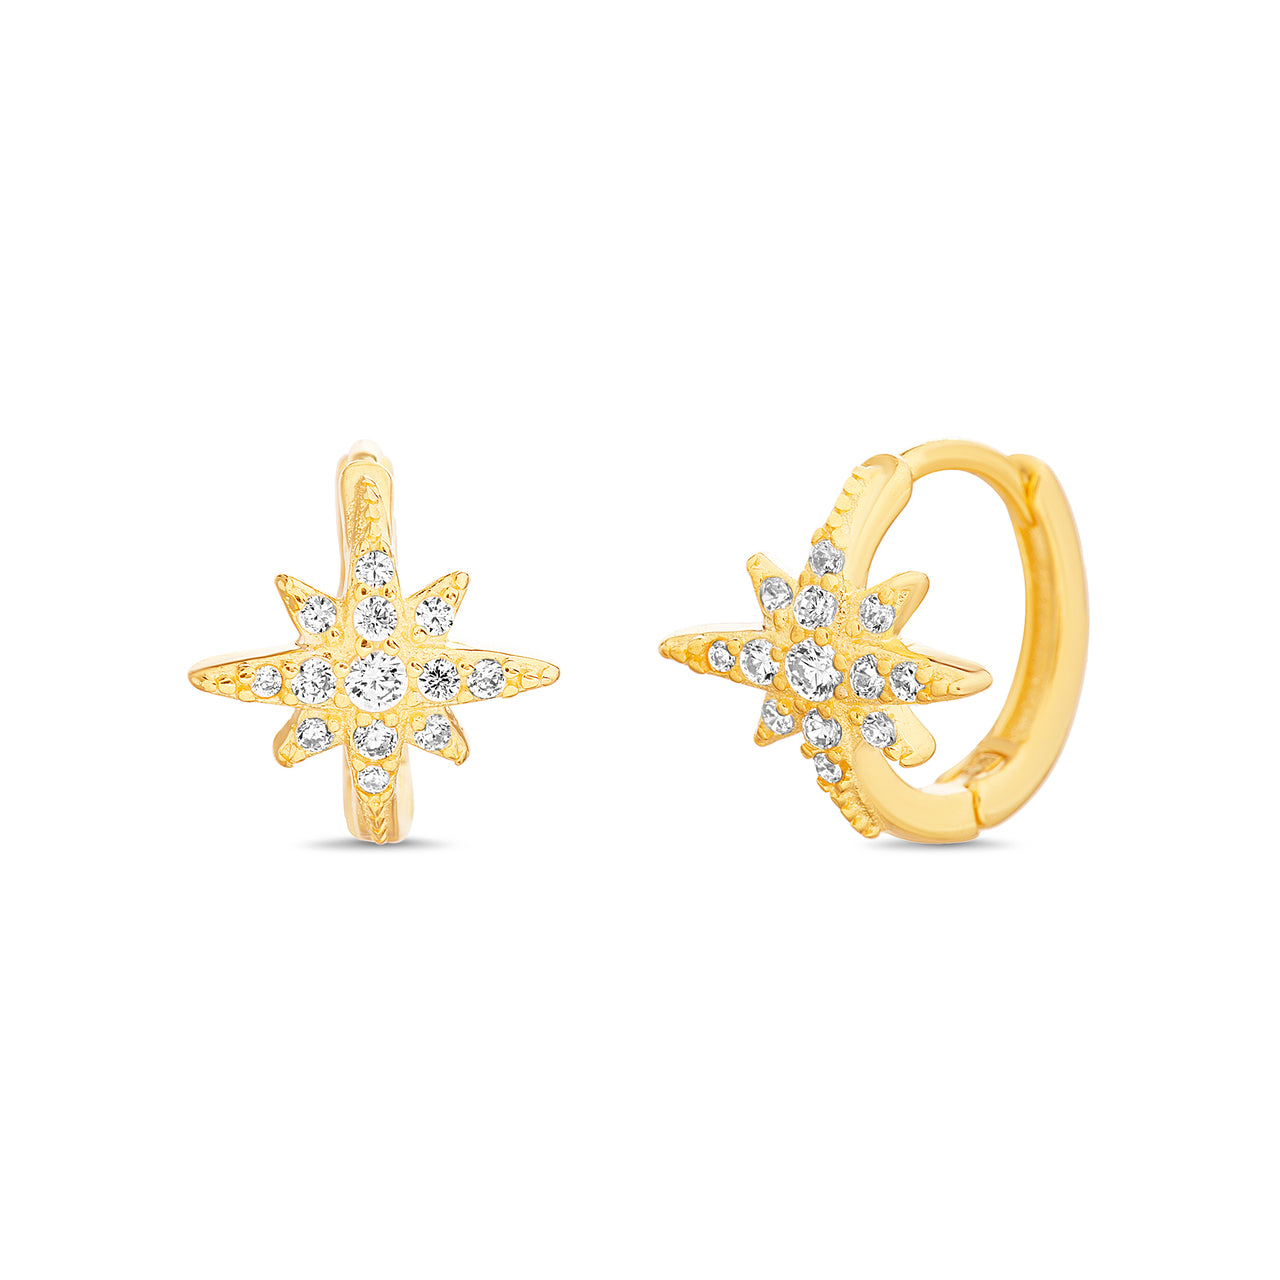 Lesa Michele Yellow Gold Plated Sterling Silver Star Burst Hoop Earrings with Cubic Zirconia